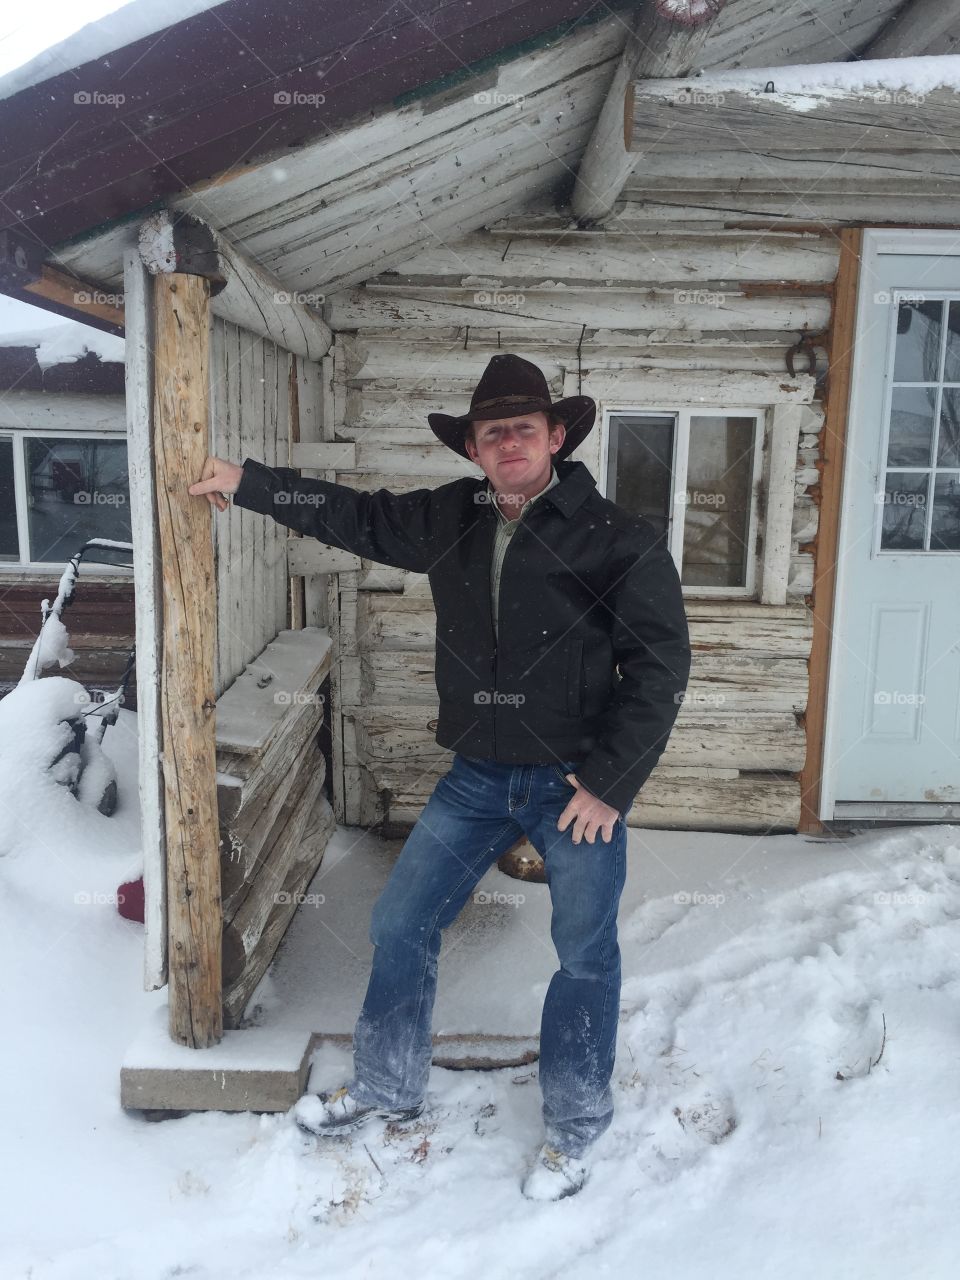 Cowboy in snow. One snowy day on a ranch in southeast Wyoming